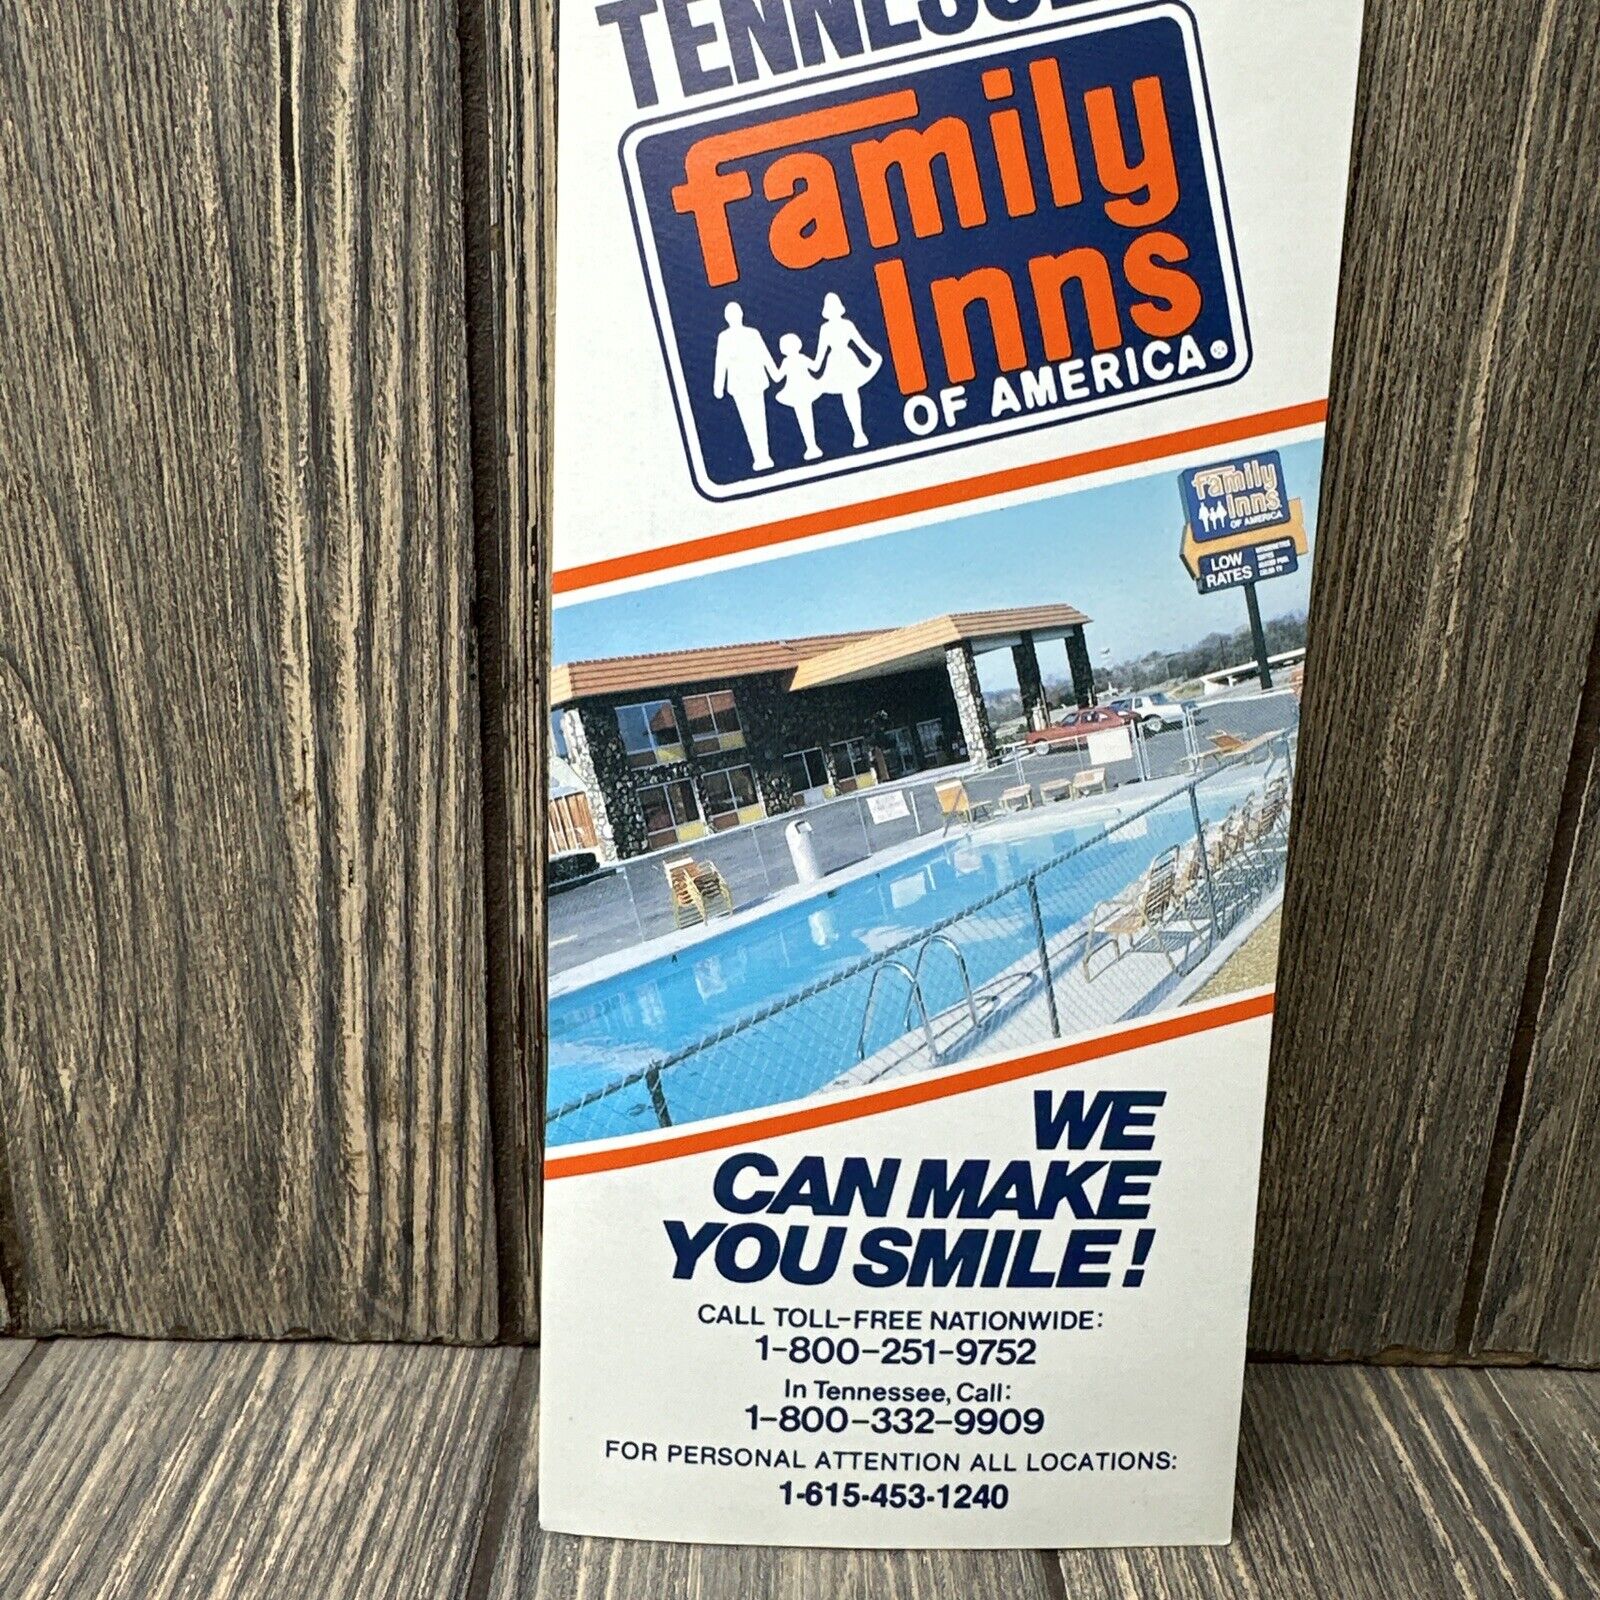 Vintage Tennessee Family Inn\'s of America Pigeon Forge Brochure